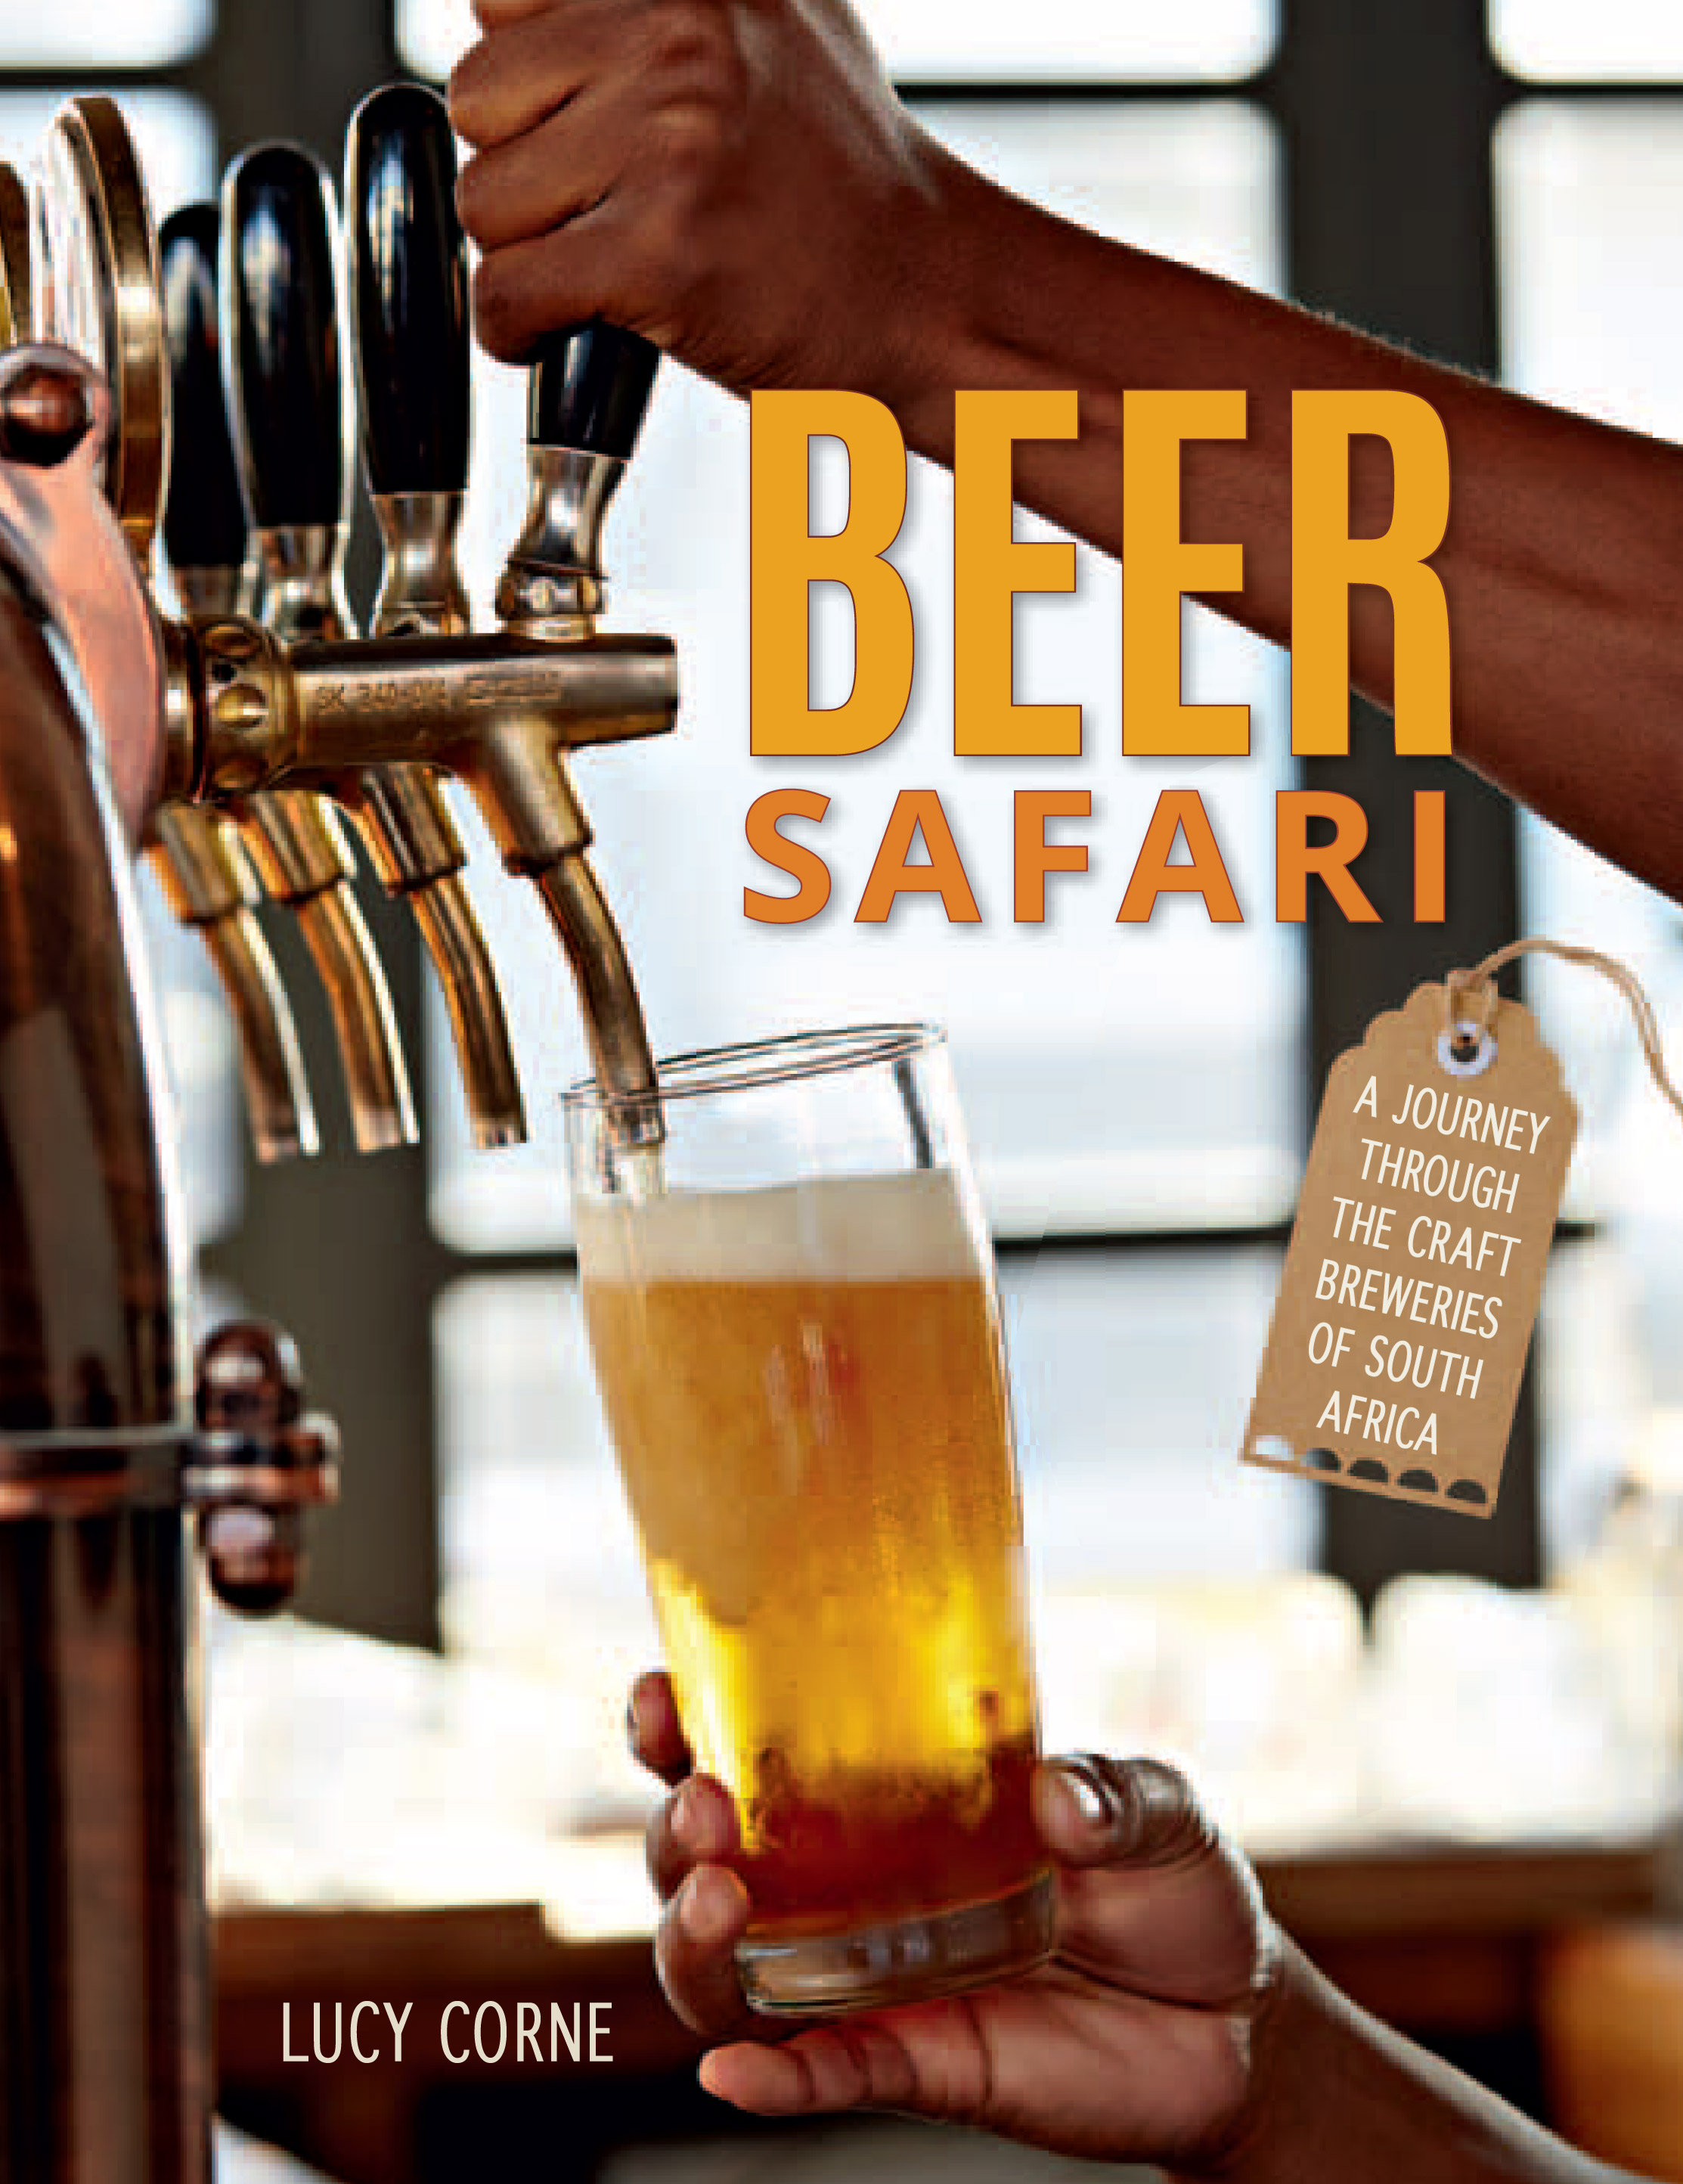 Beer Safari: A Journey through the Craft Breweries of South Africa